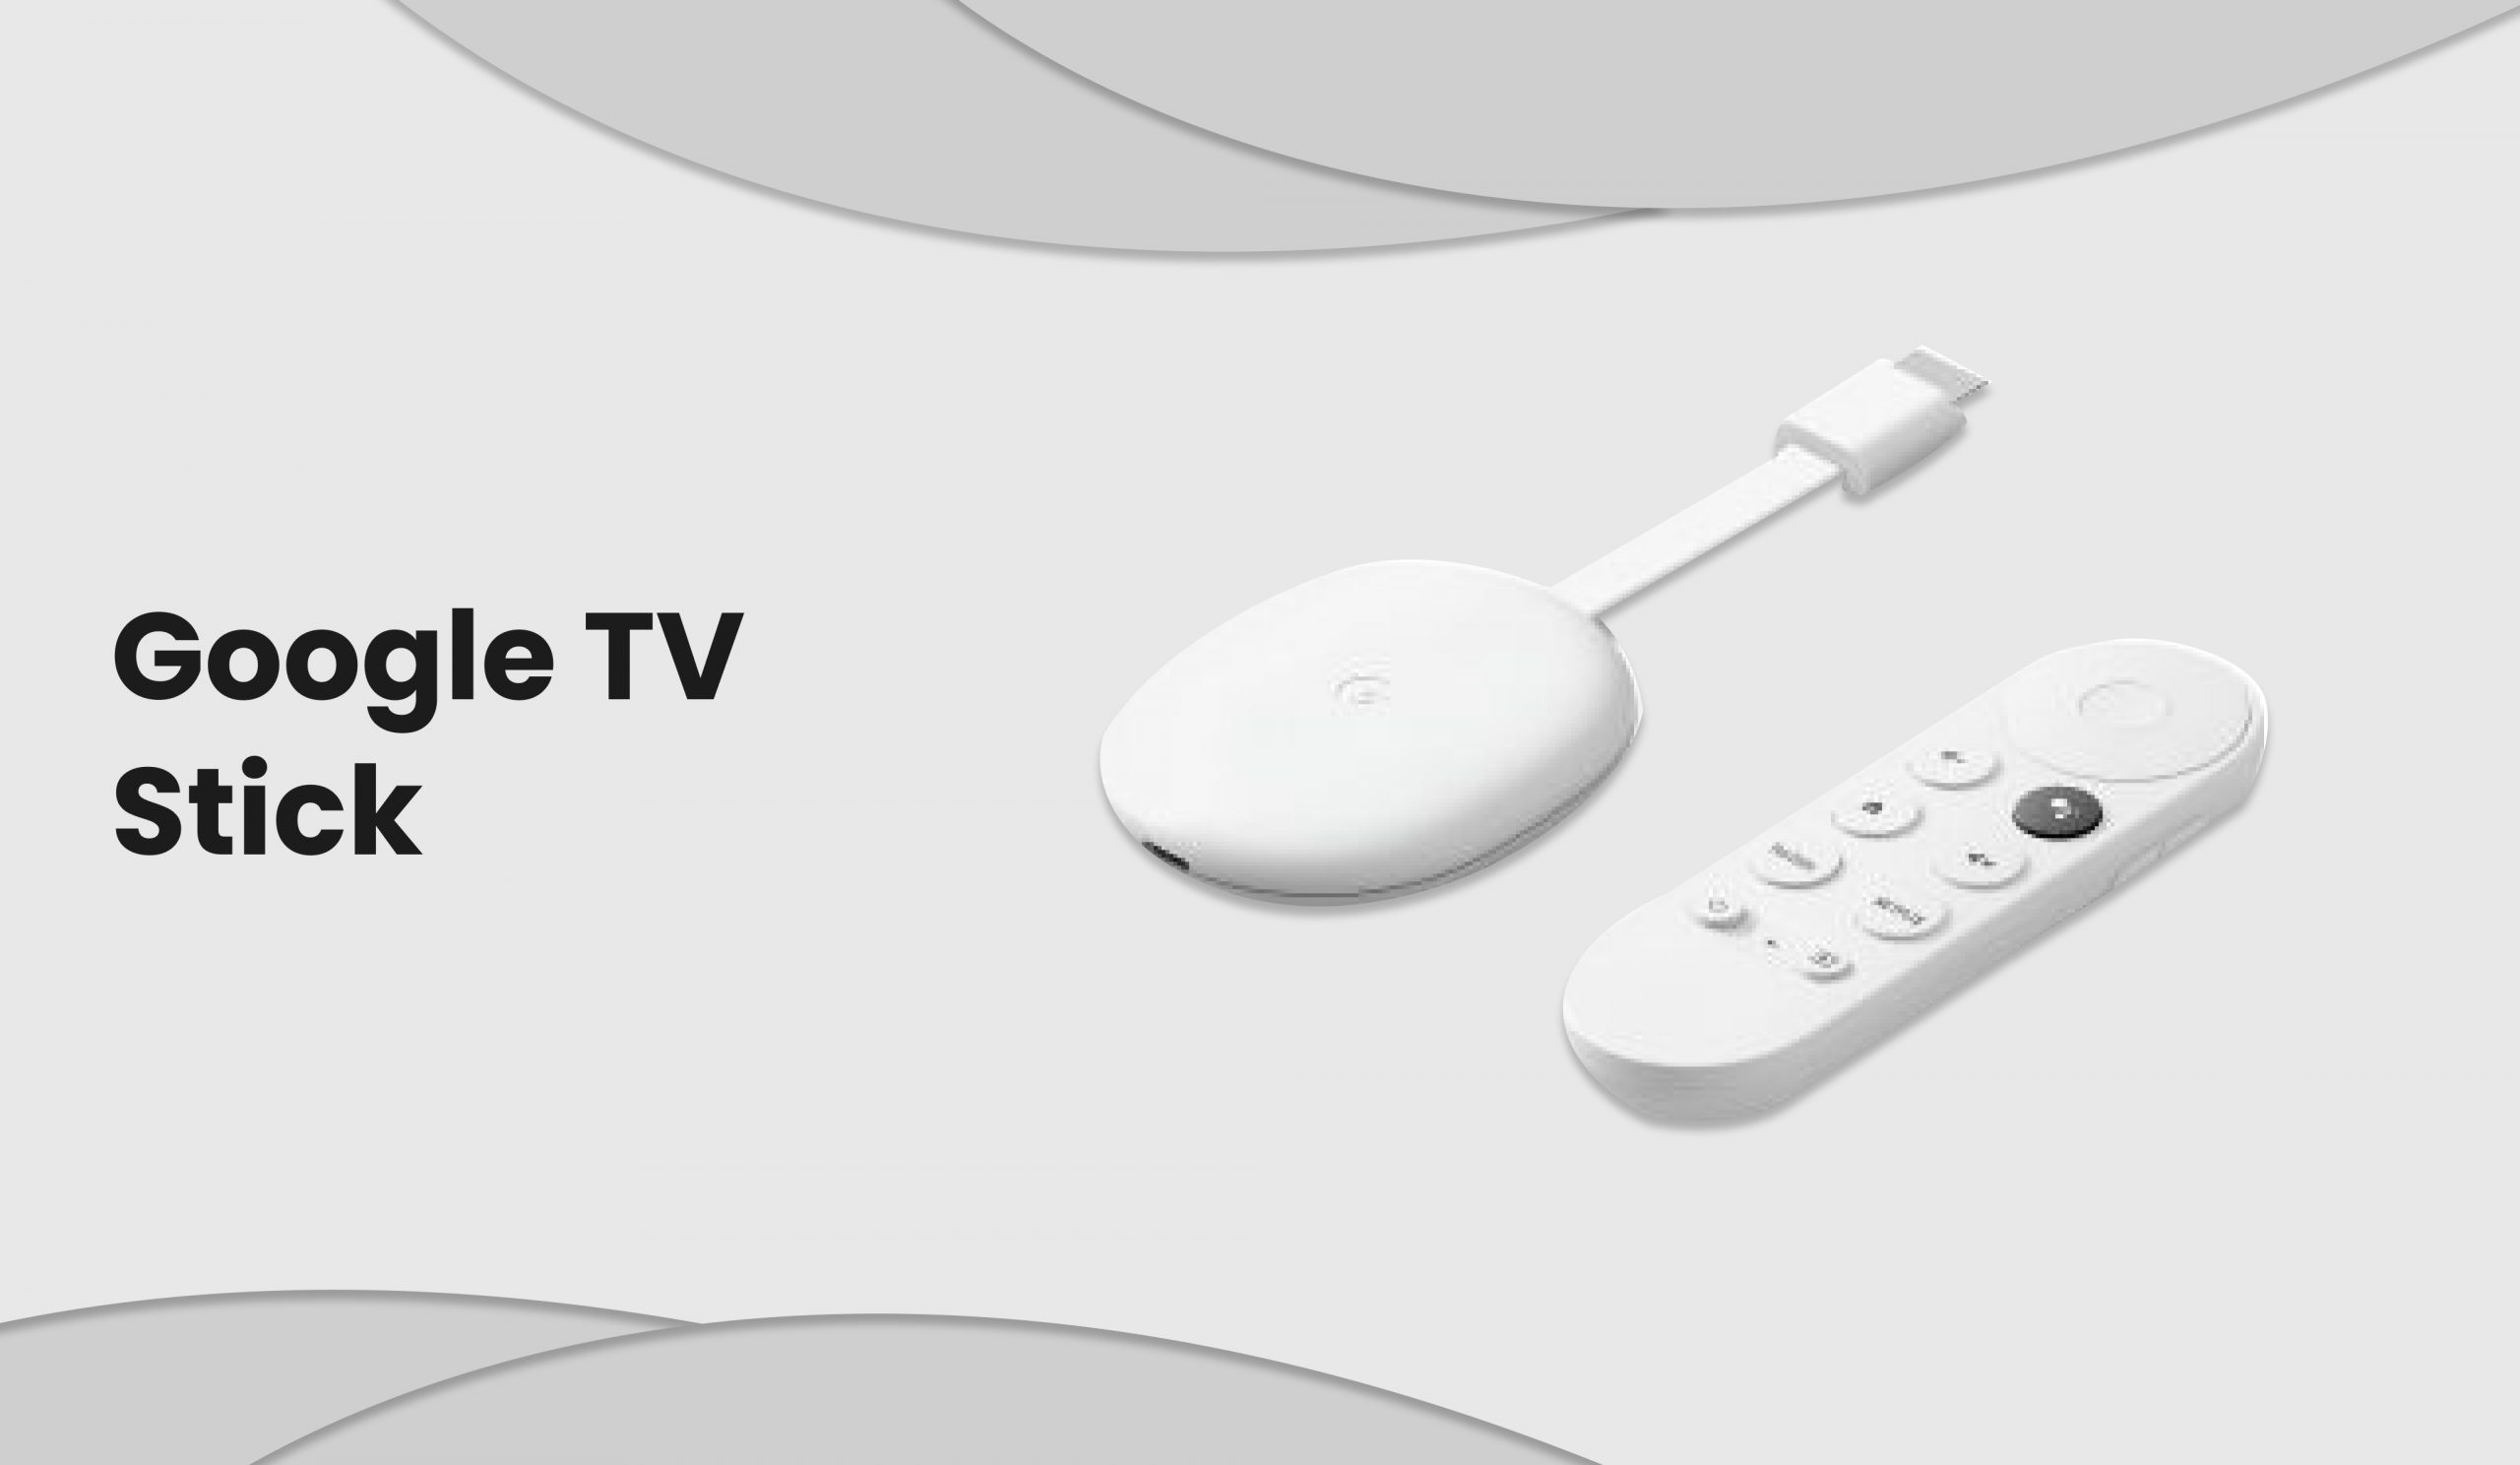 New Chromecast with Google TV update rolling out